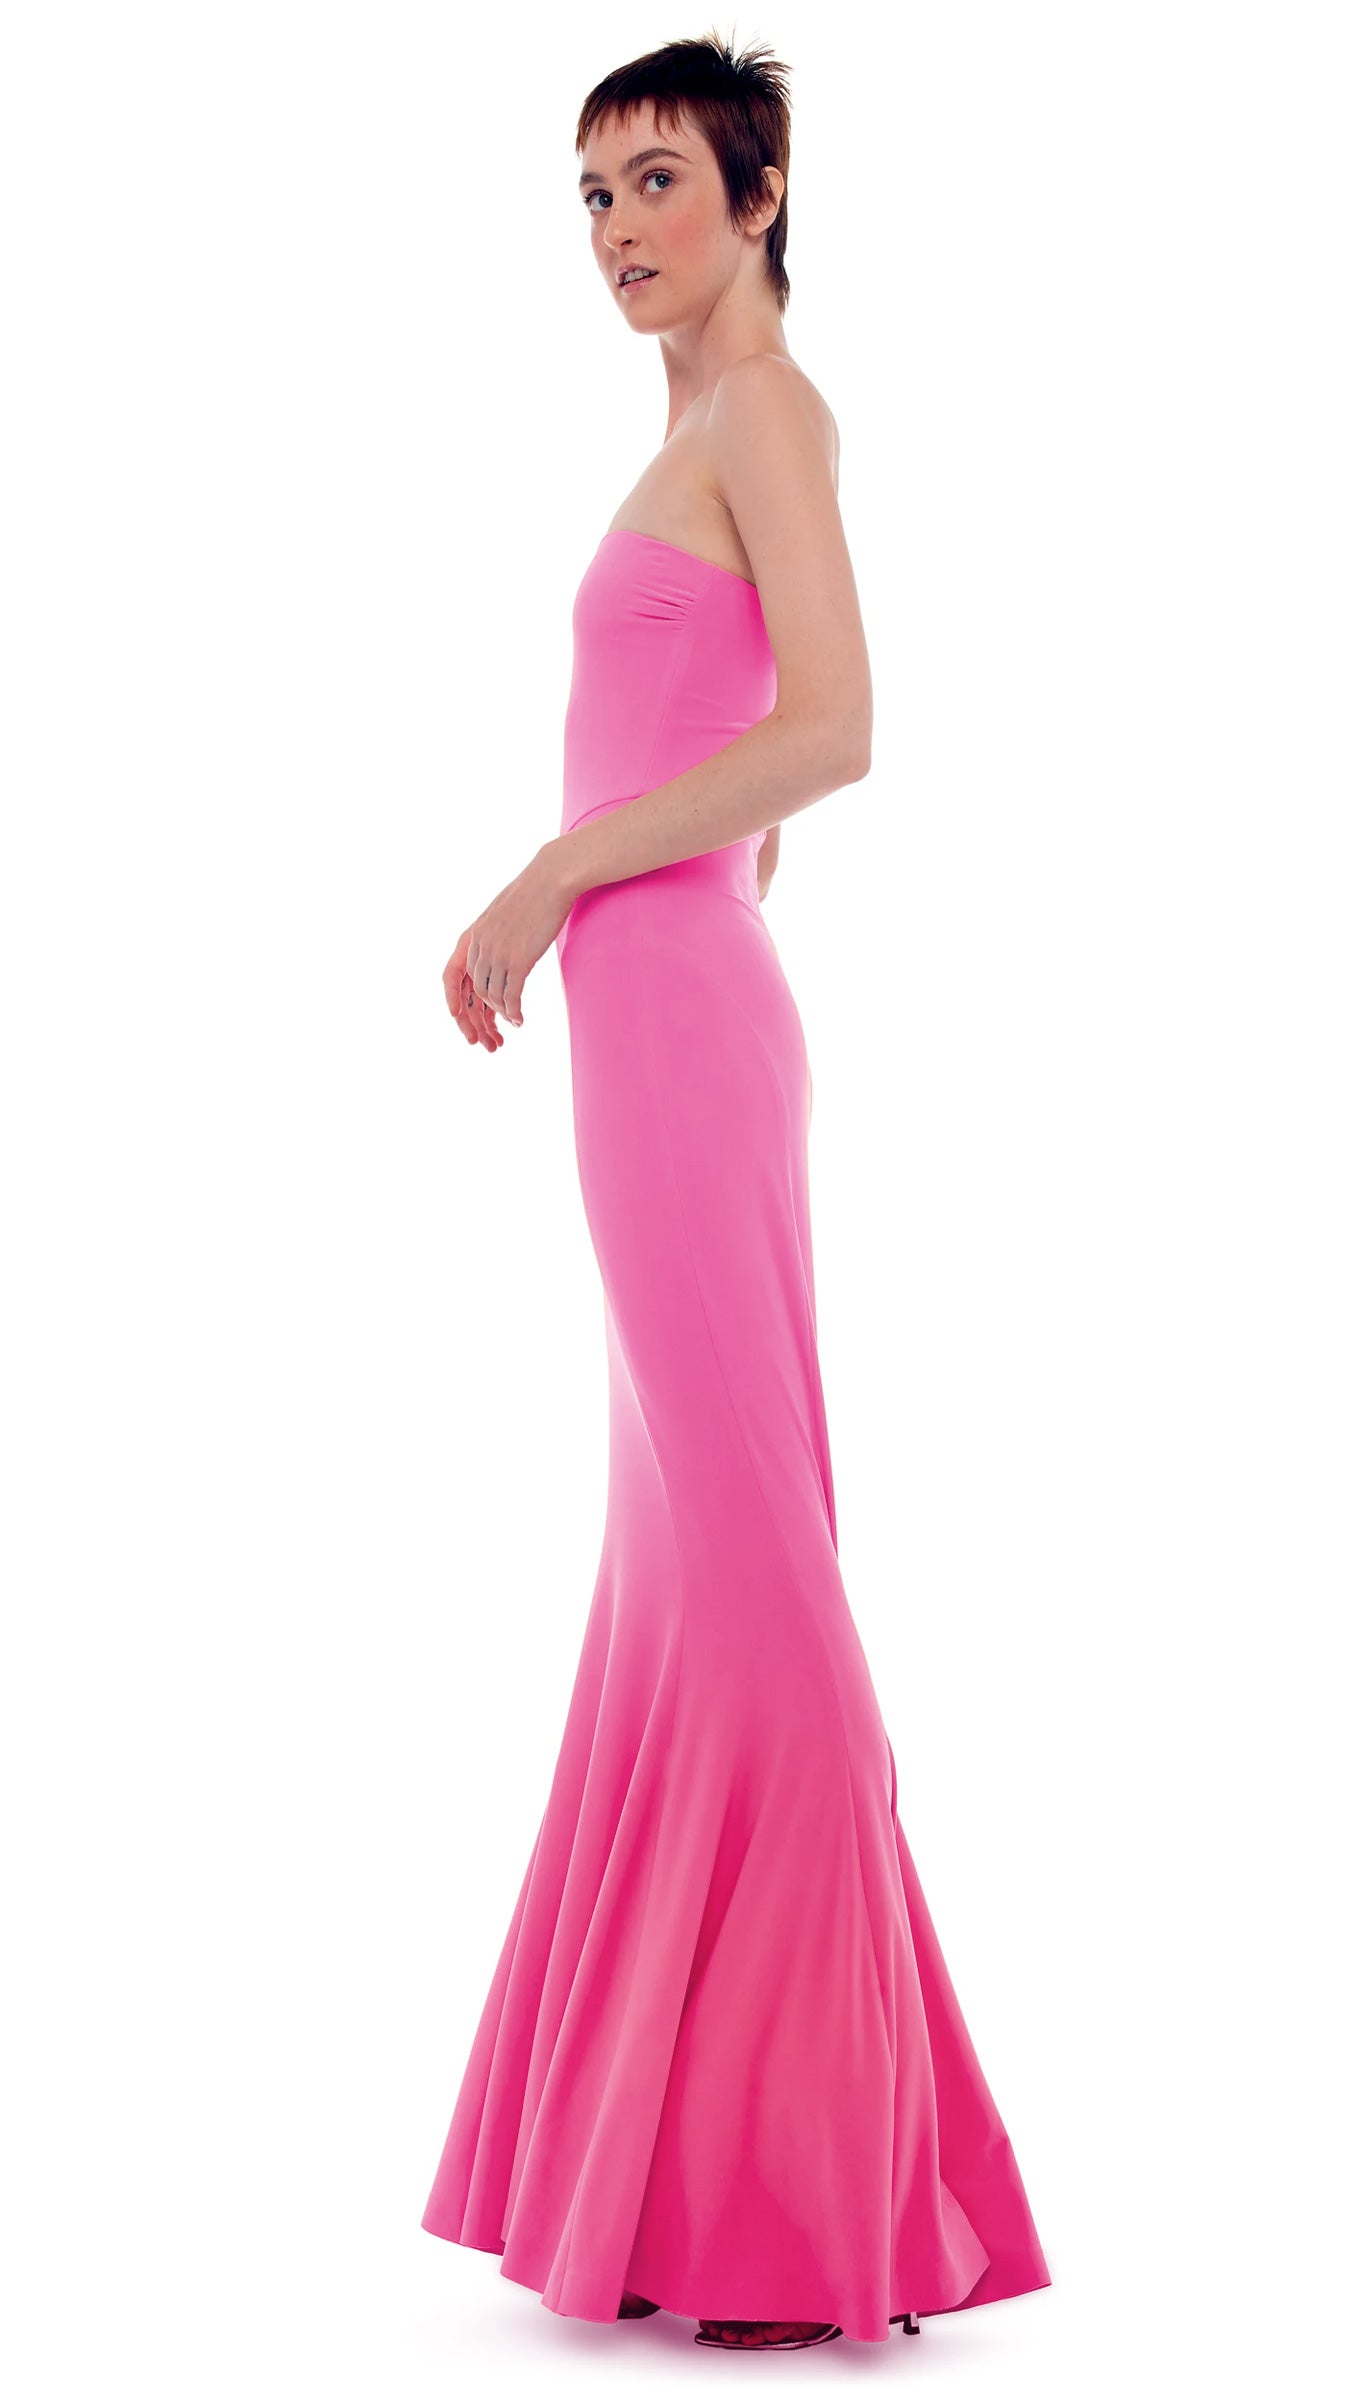 STRAPLESS FISHTAIL GOWN – Norma Kamali